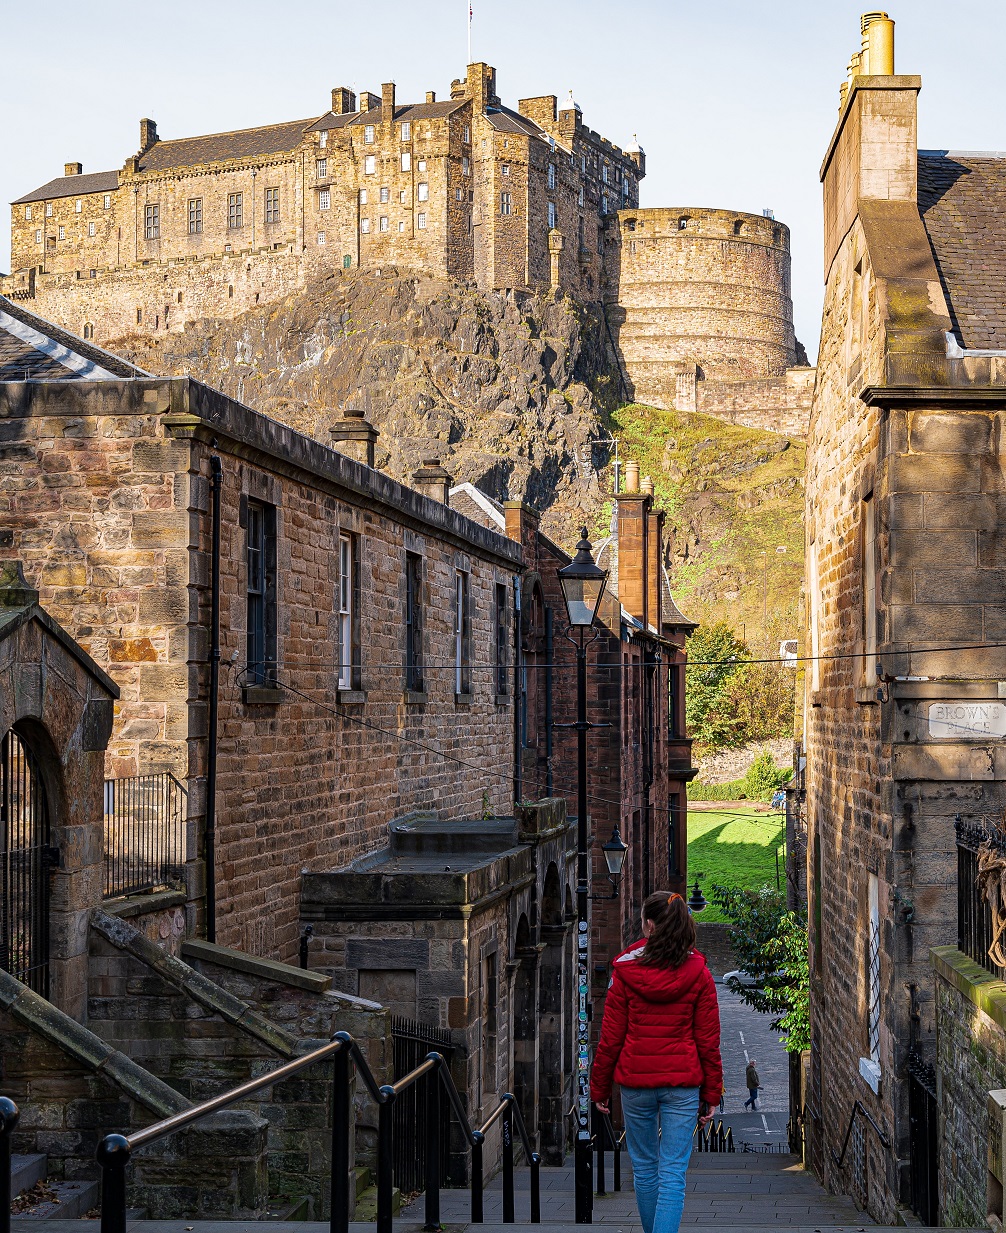 A women walking down a flight of stairs past historic buildings, with Edinburgh Castle in the near distance.